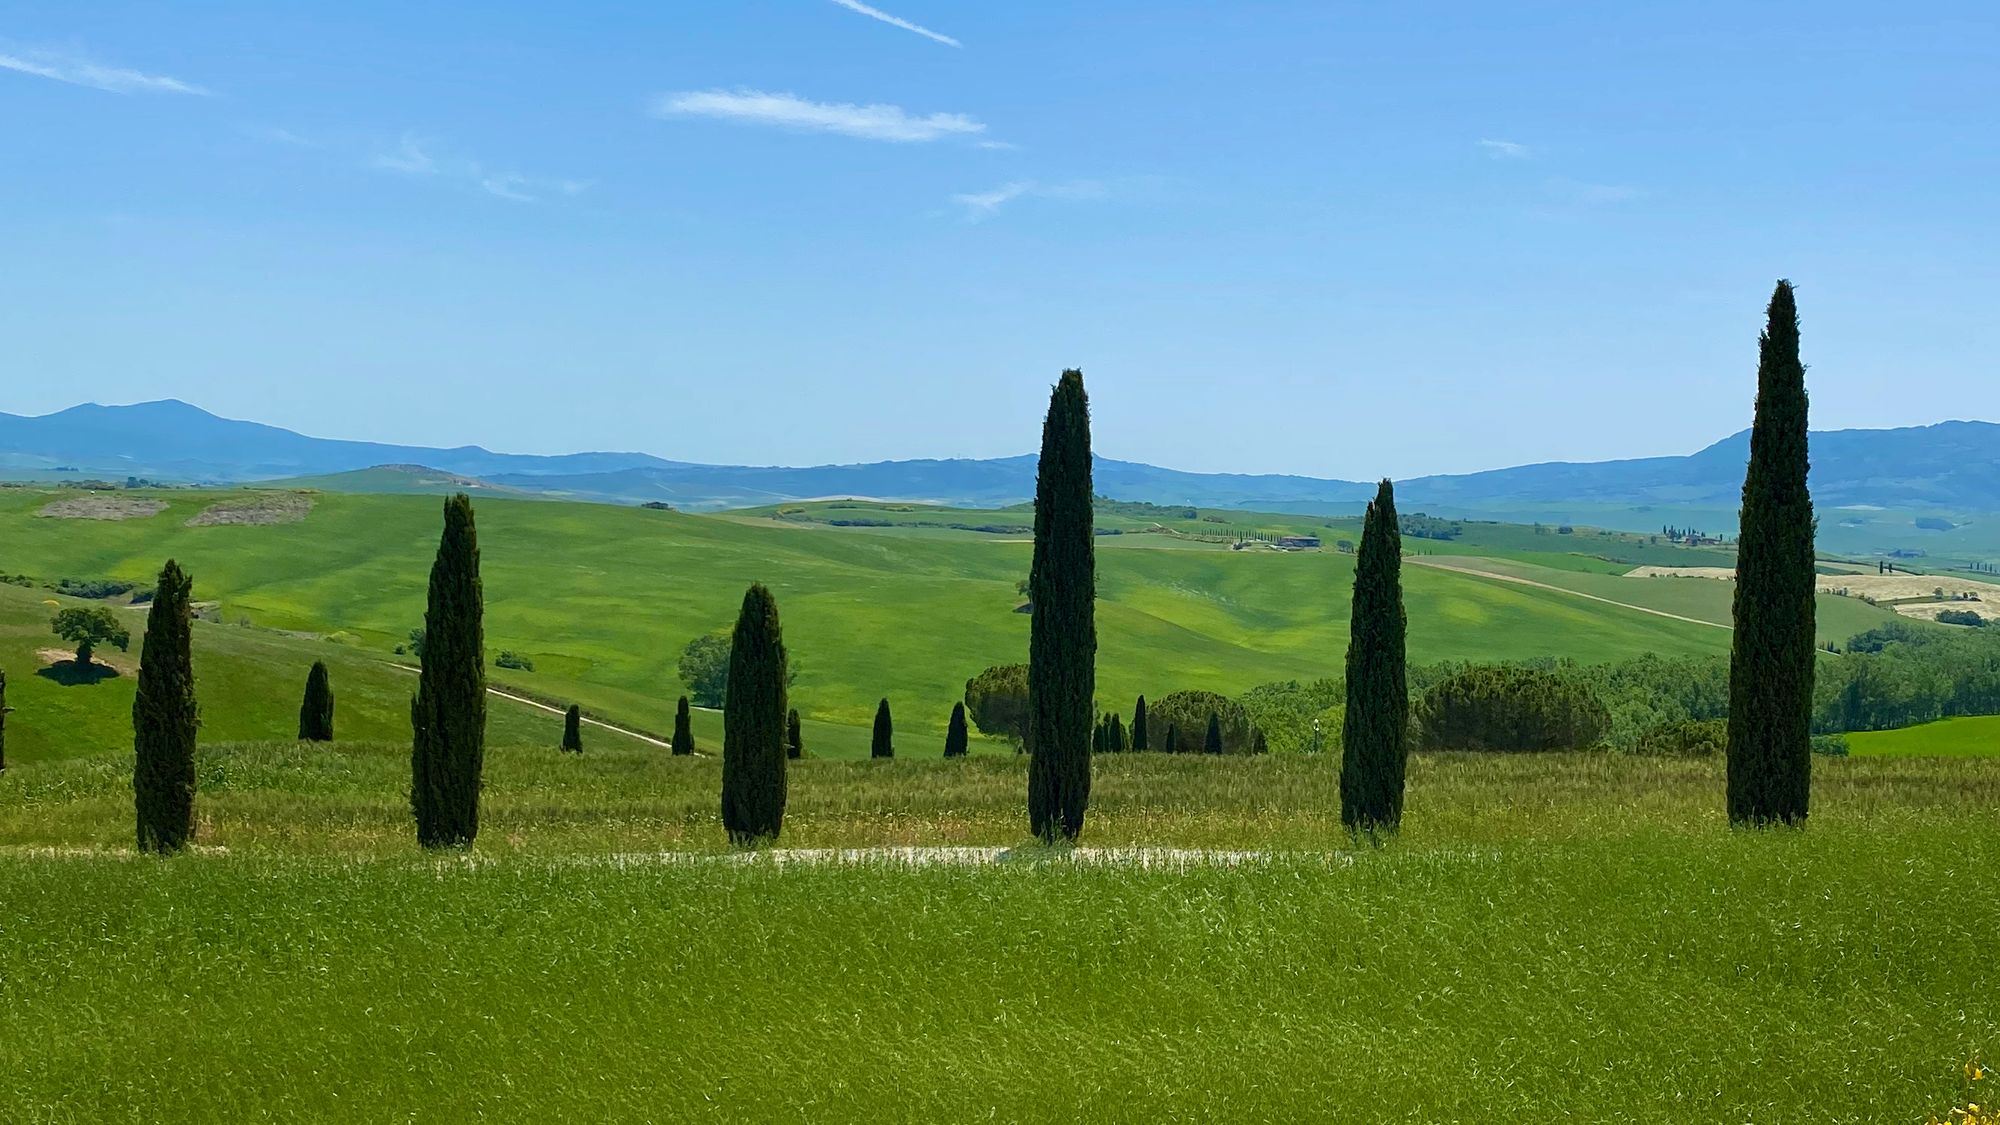 Cypress trees and rolling hills in Tuscany